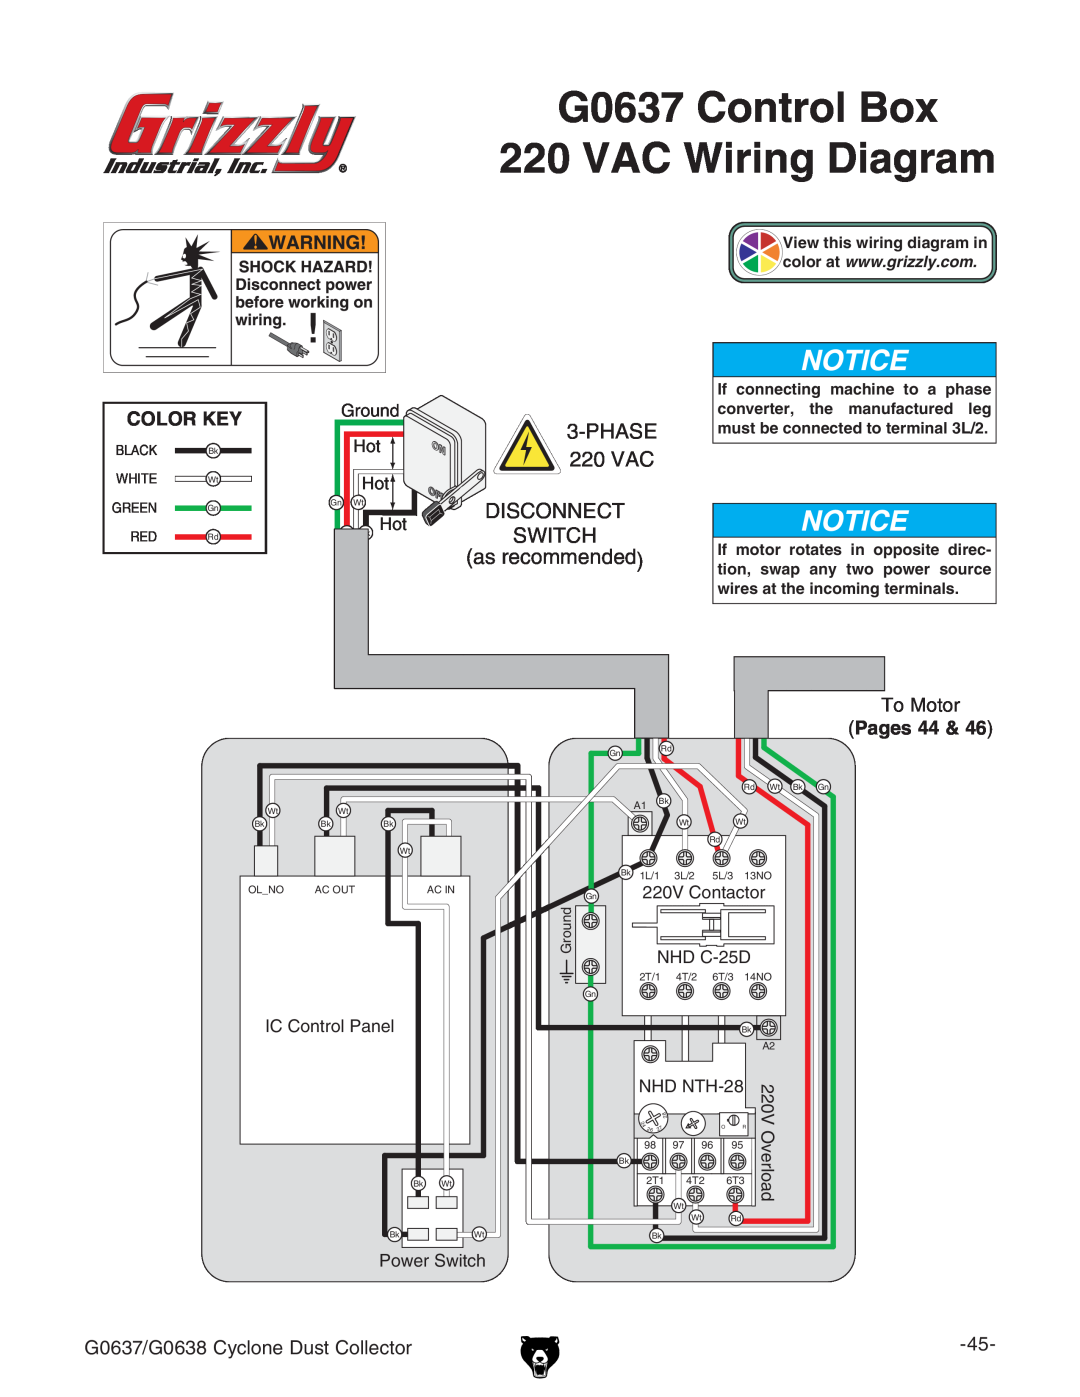 Grizzly G0638 owner manual Wiring Diagrams, G0637 control box wiring, Pages 44 